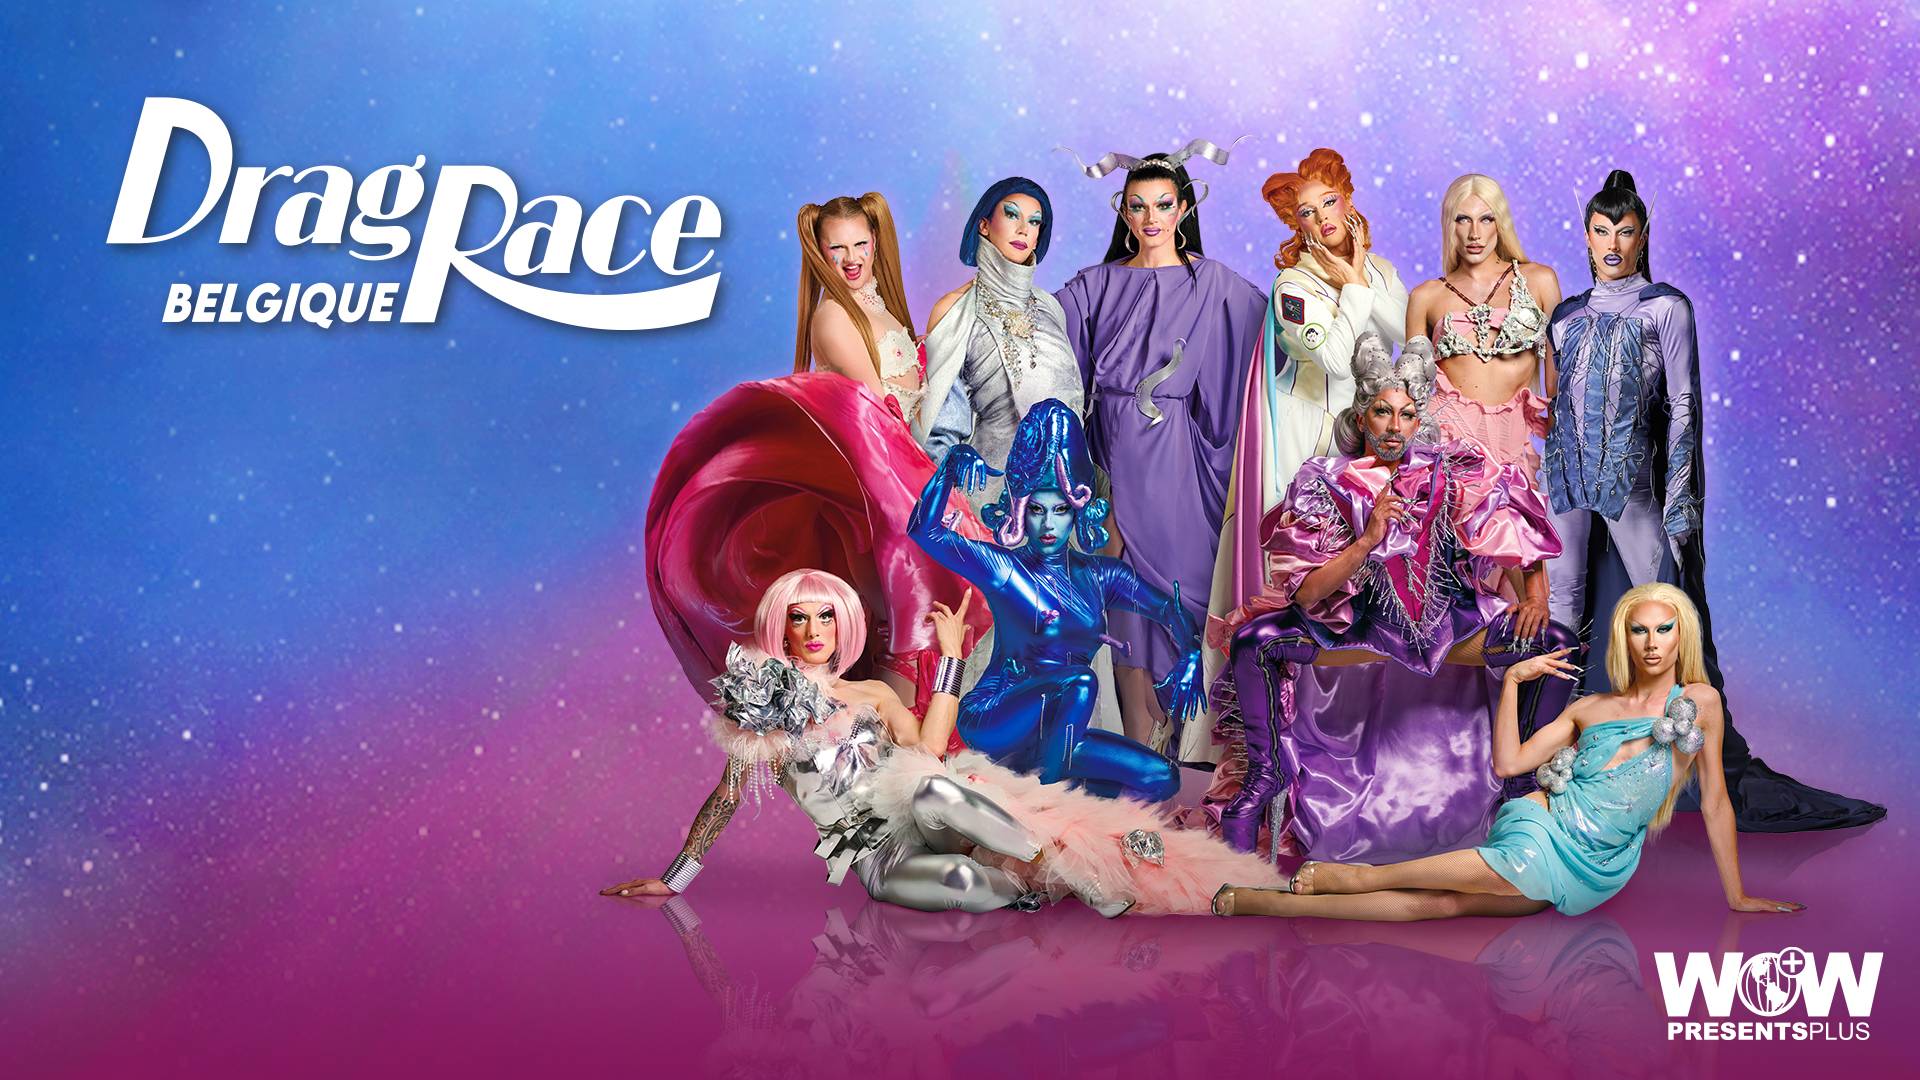 Meet the Queens Competing in the First Season of 'Drag Race Brasil